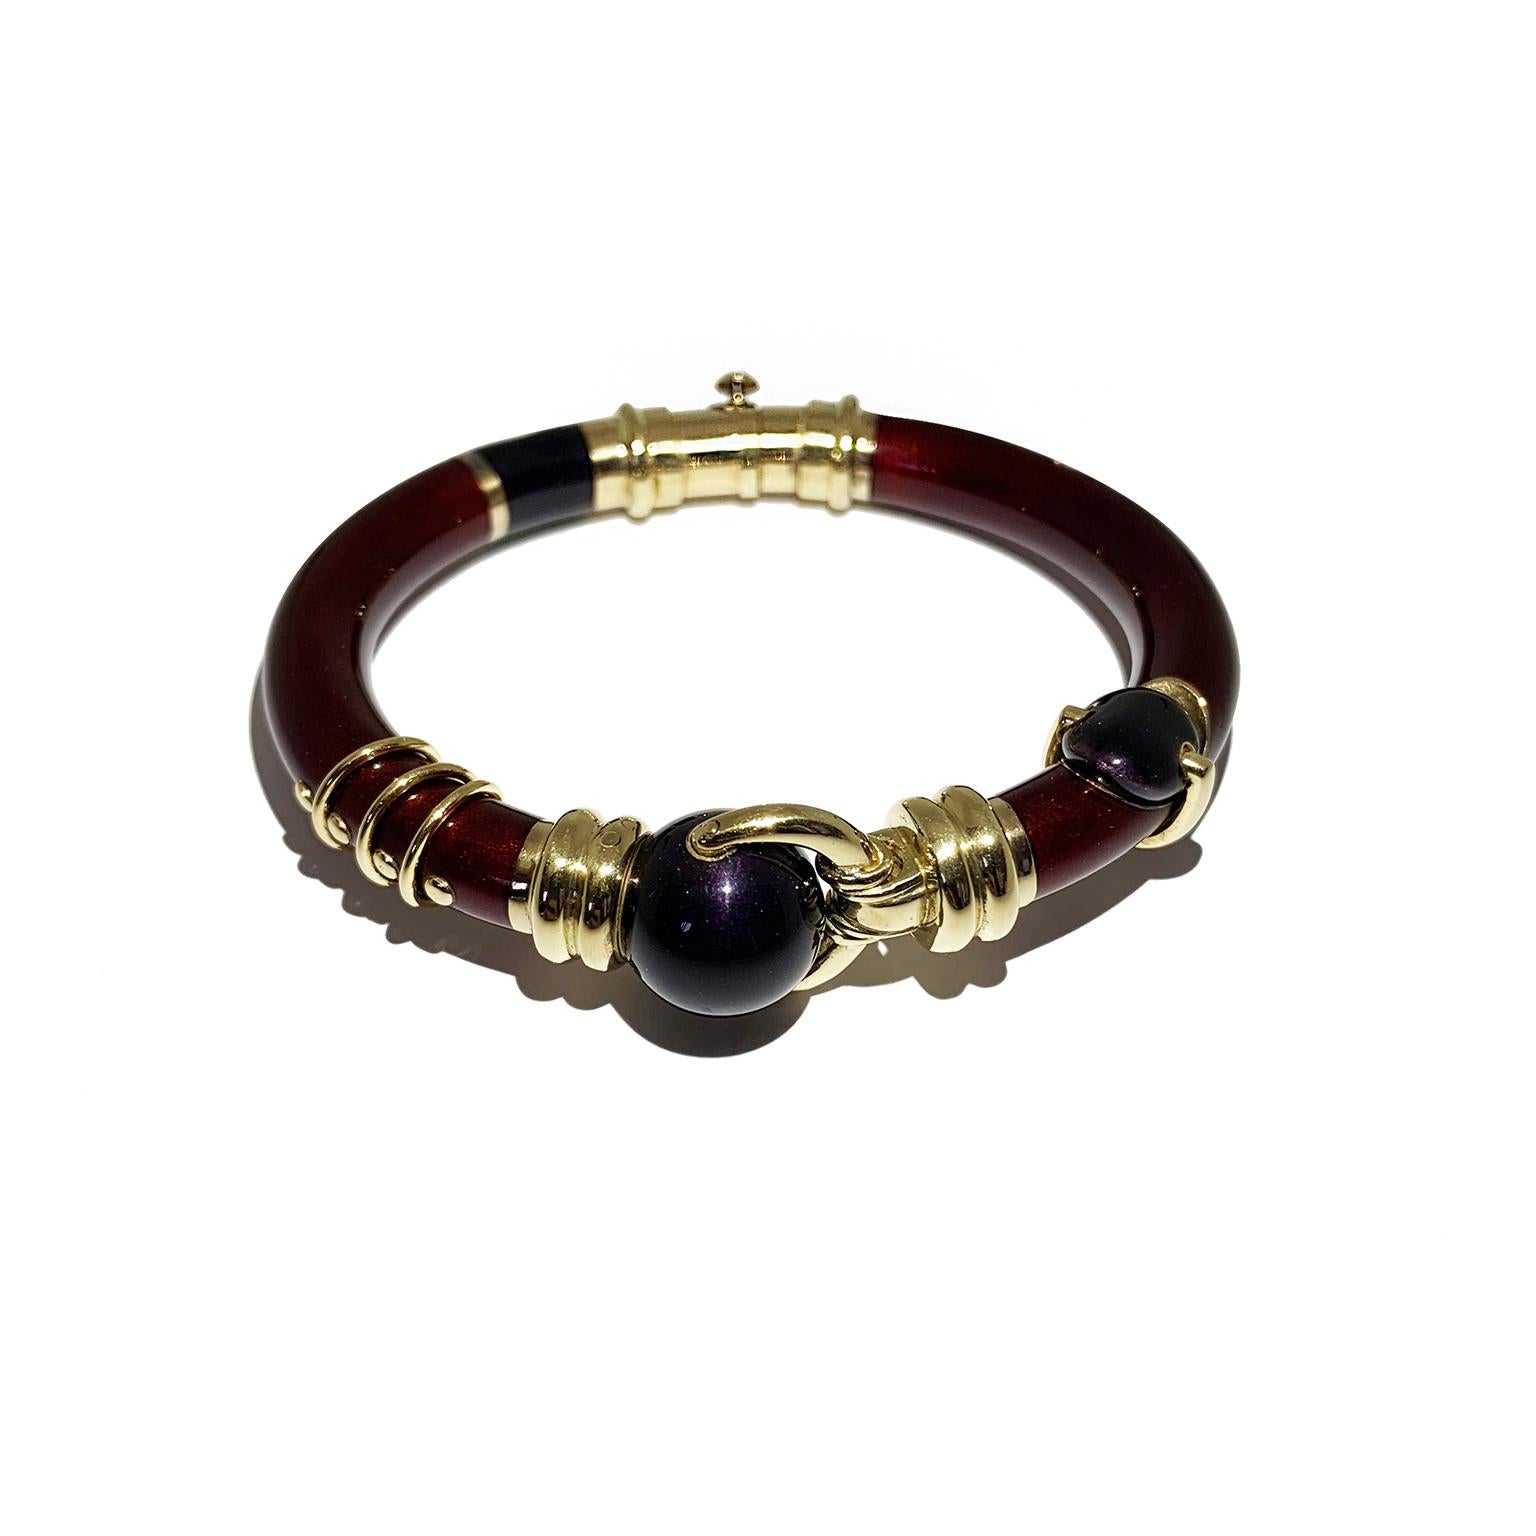 Enameled red and blu navy on a yellow gold 18 kt bangle in a modern design
total weight of the gold 36,00
STAMP 750 LA NOUVELLE BAGUE